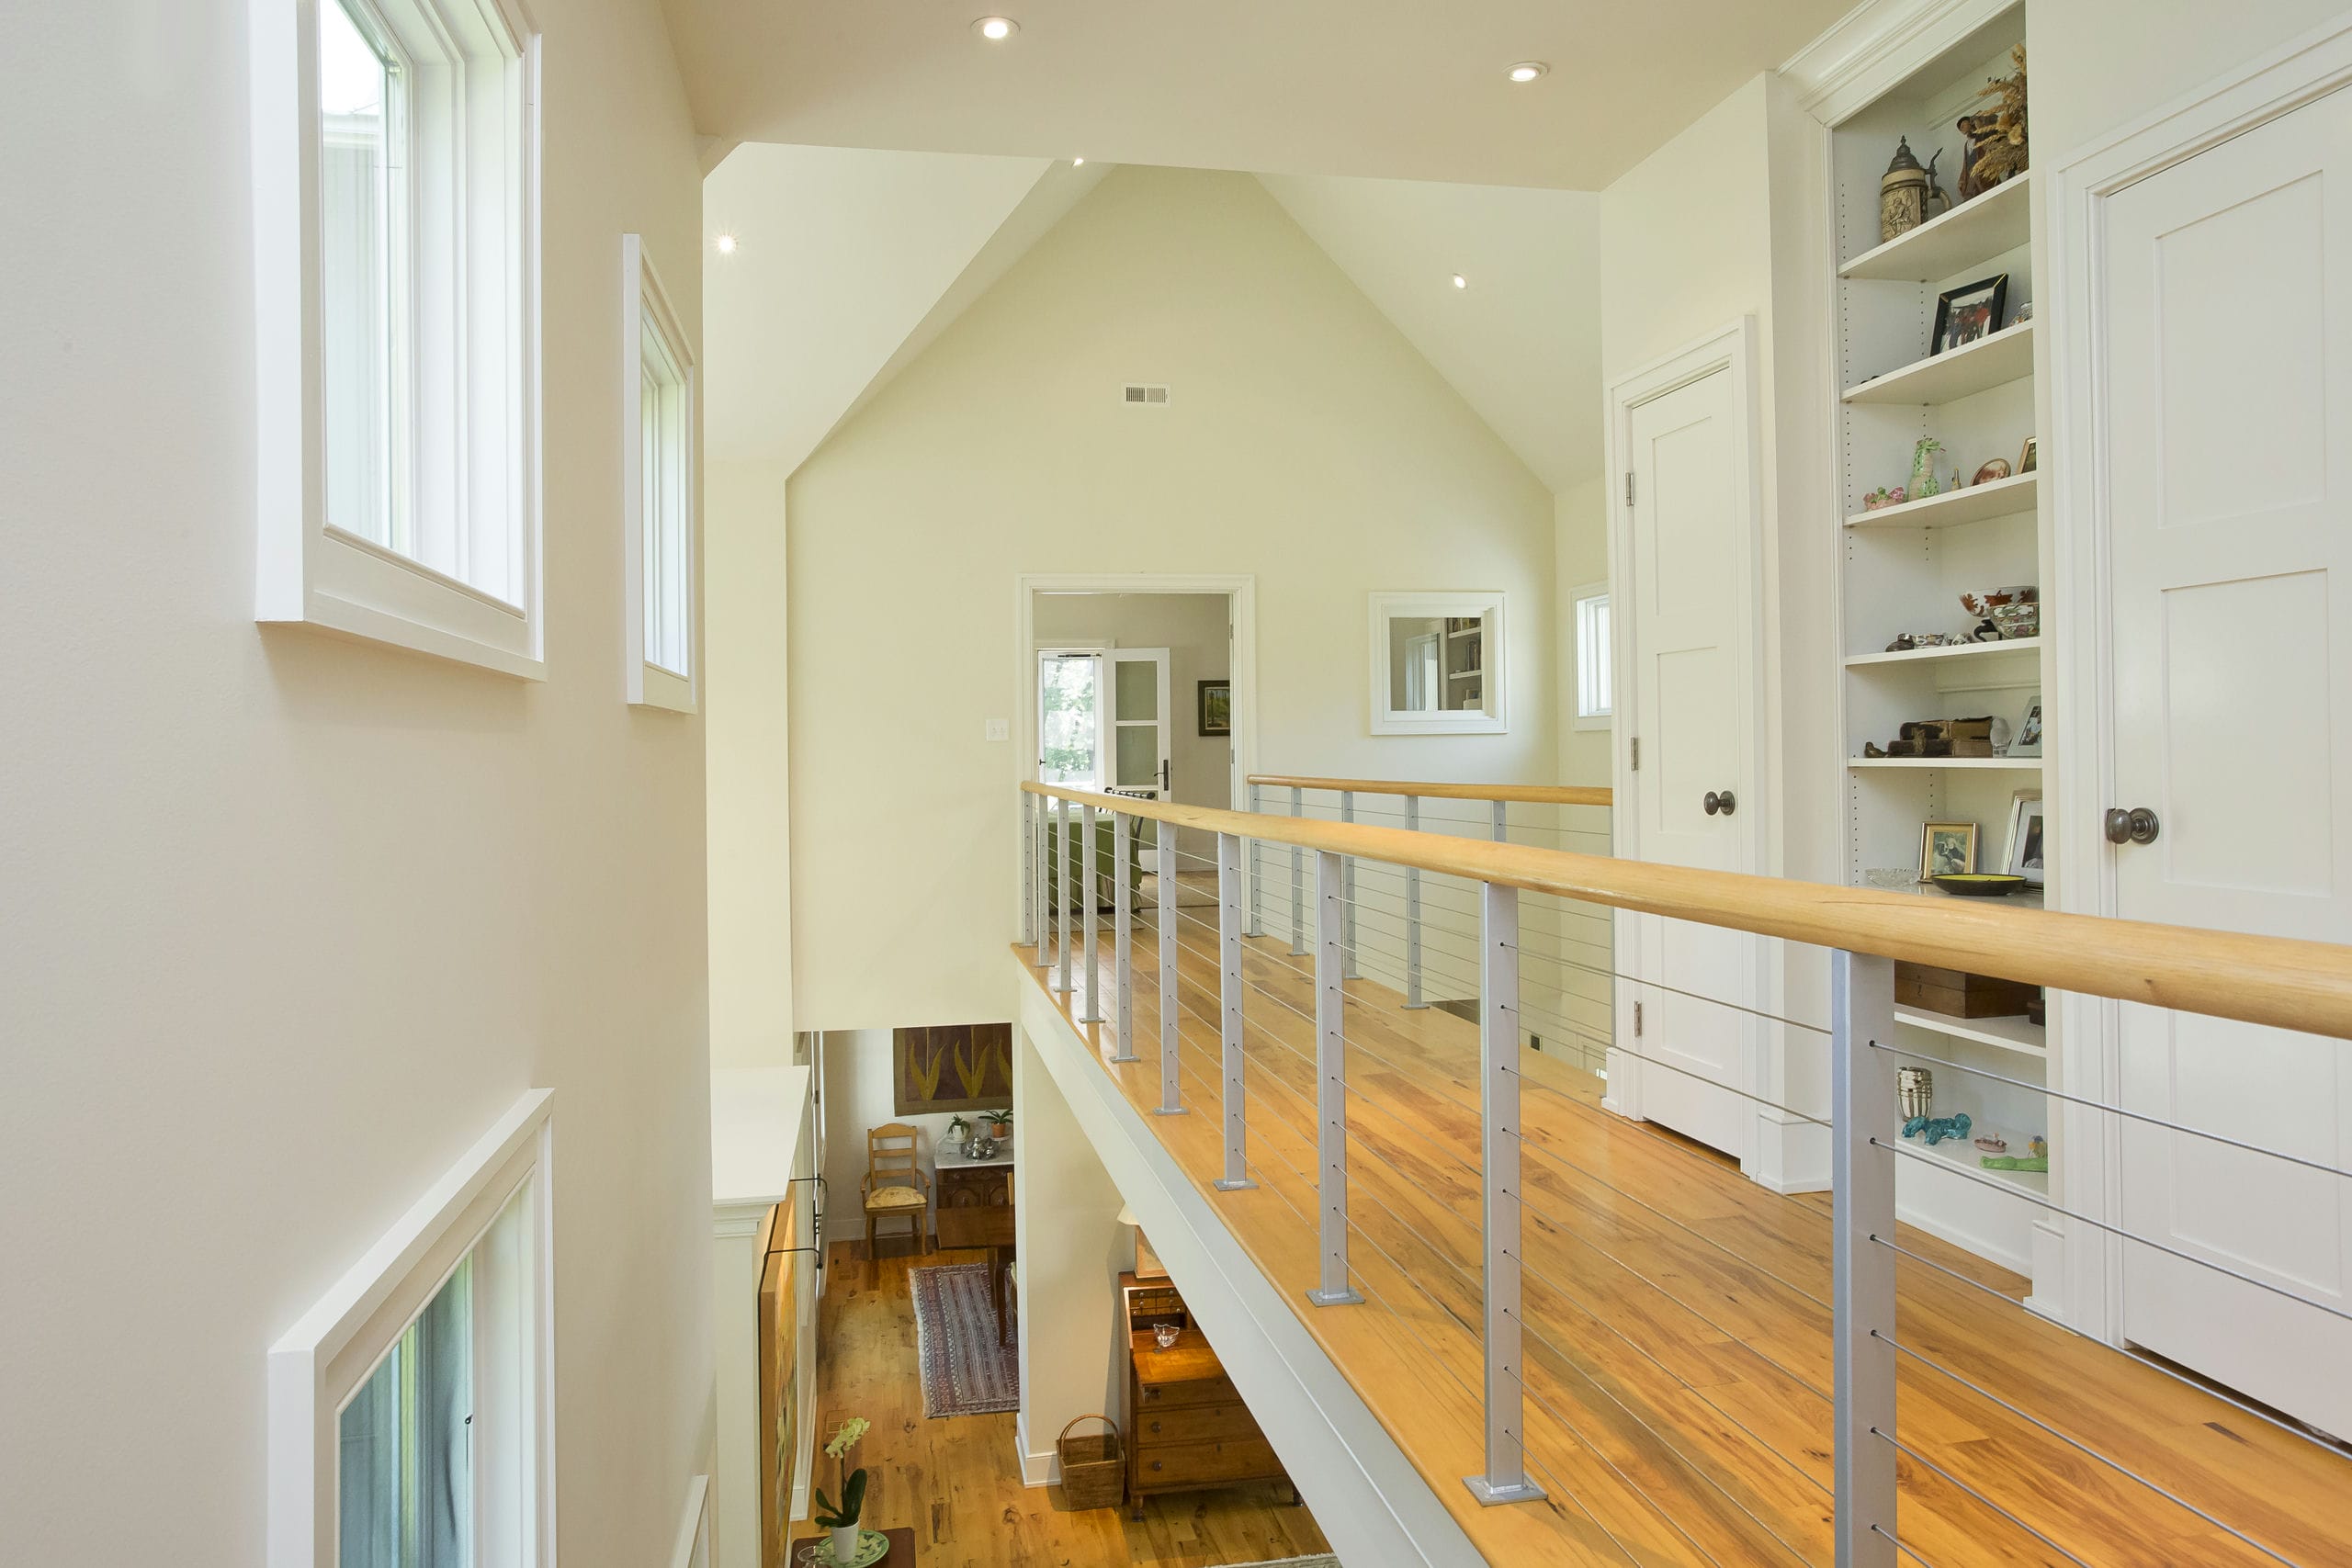 Catwalk with modern cable railing passing through double height foyer with vaulted ceilings